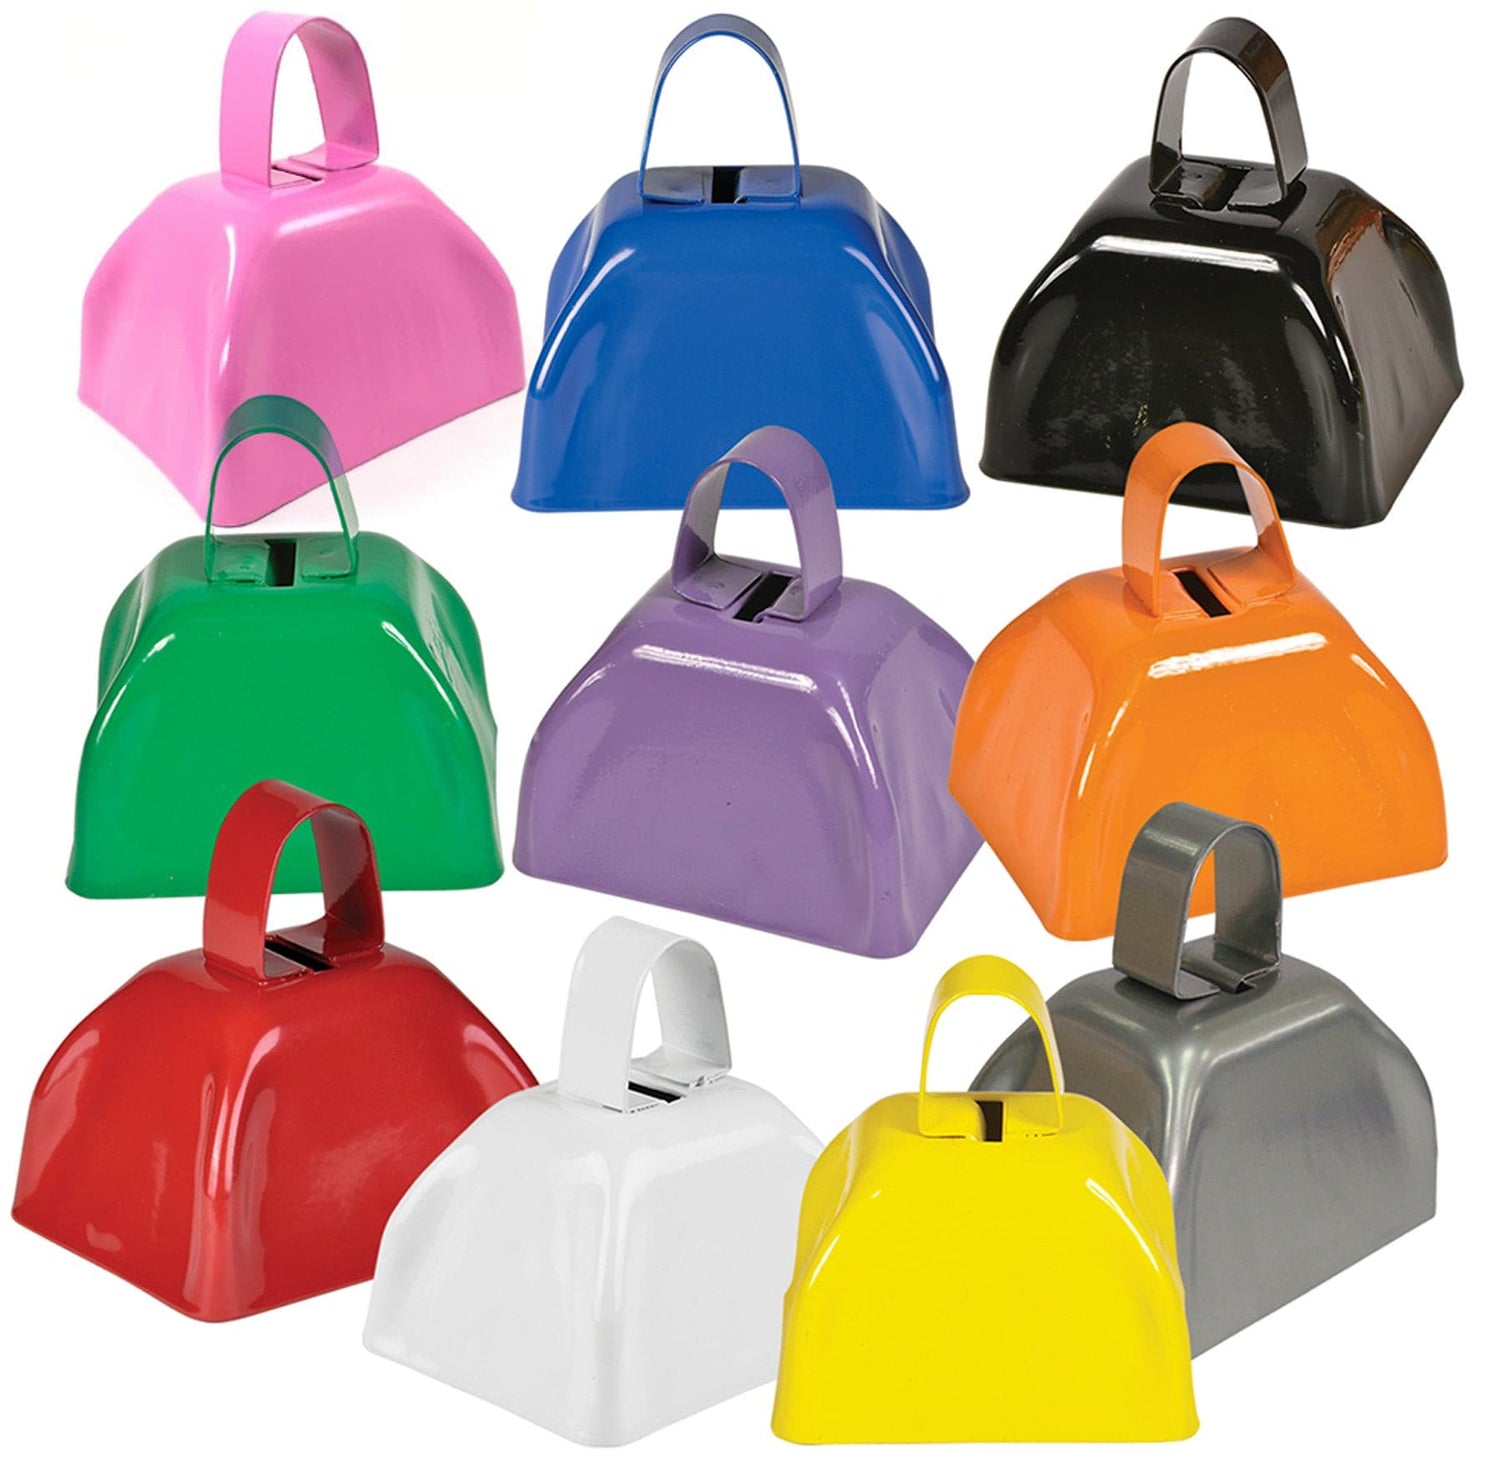 Marketing Cowbells (2.75 x 3 x 2.25), Toys and Fun